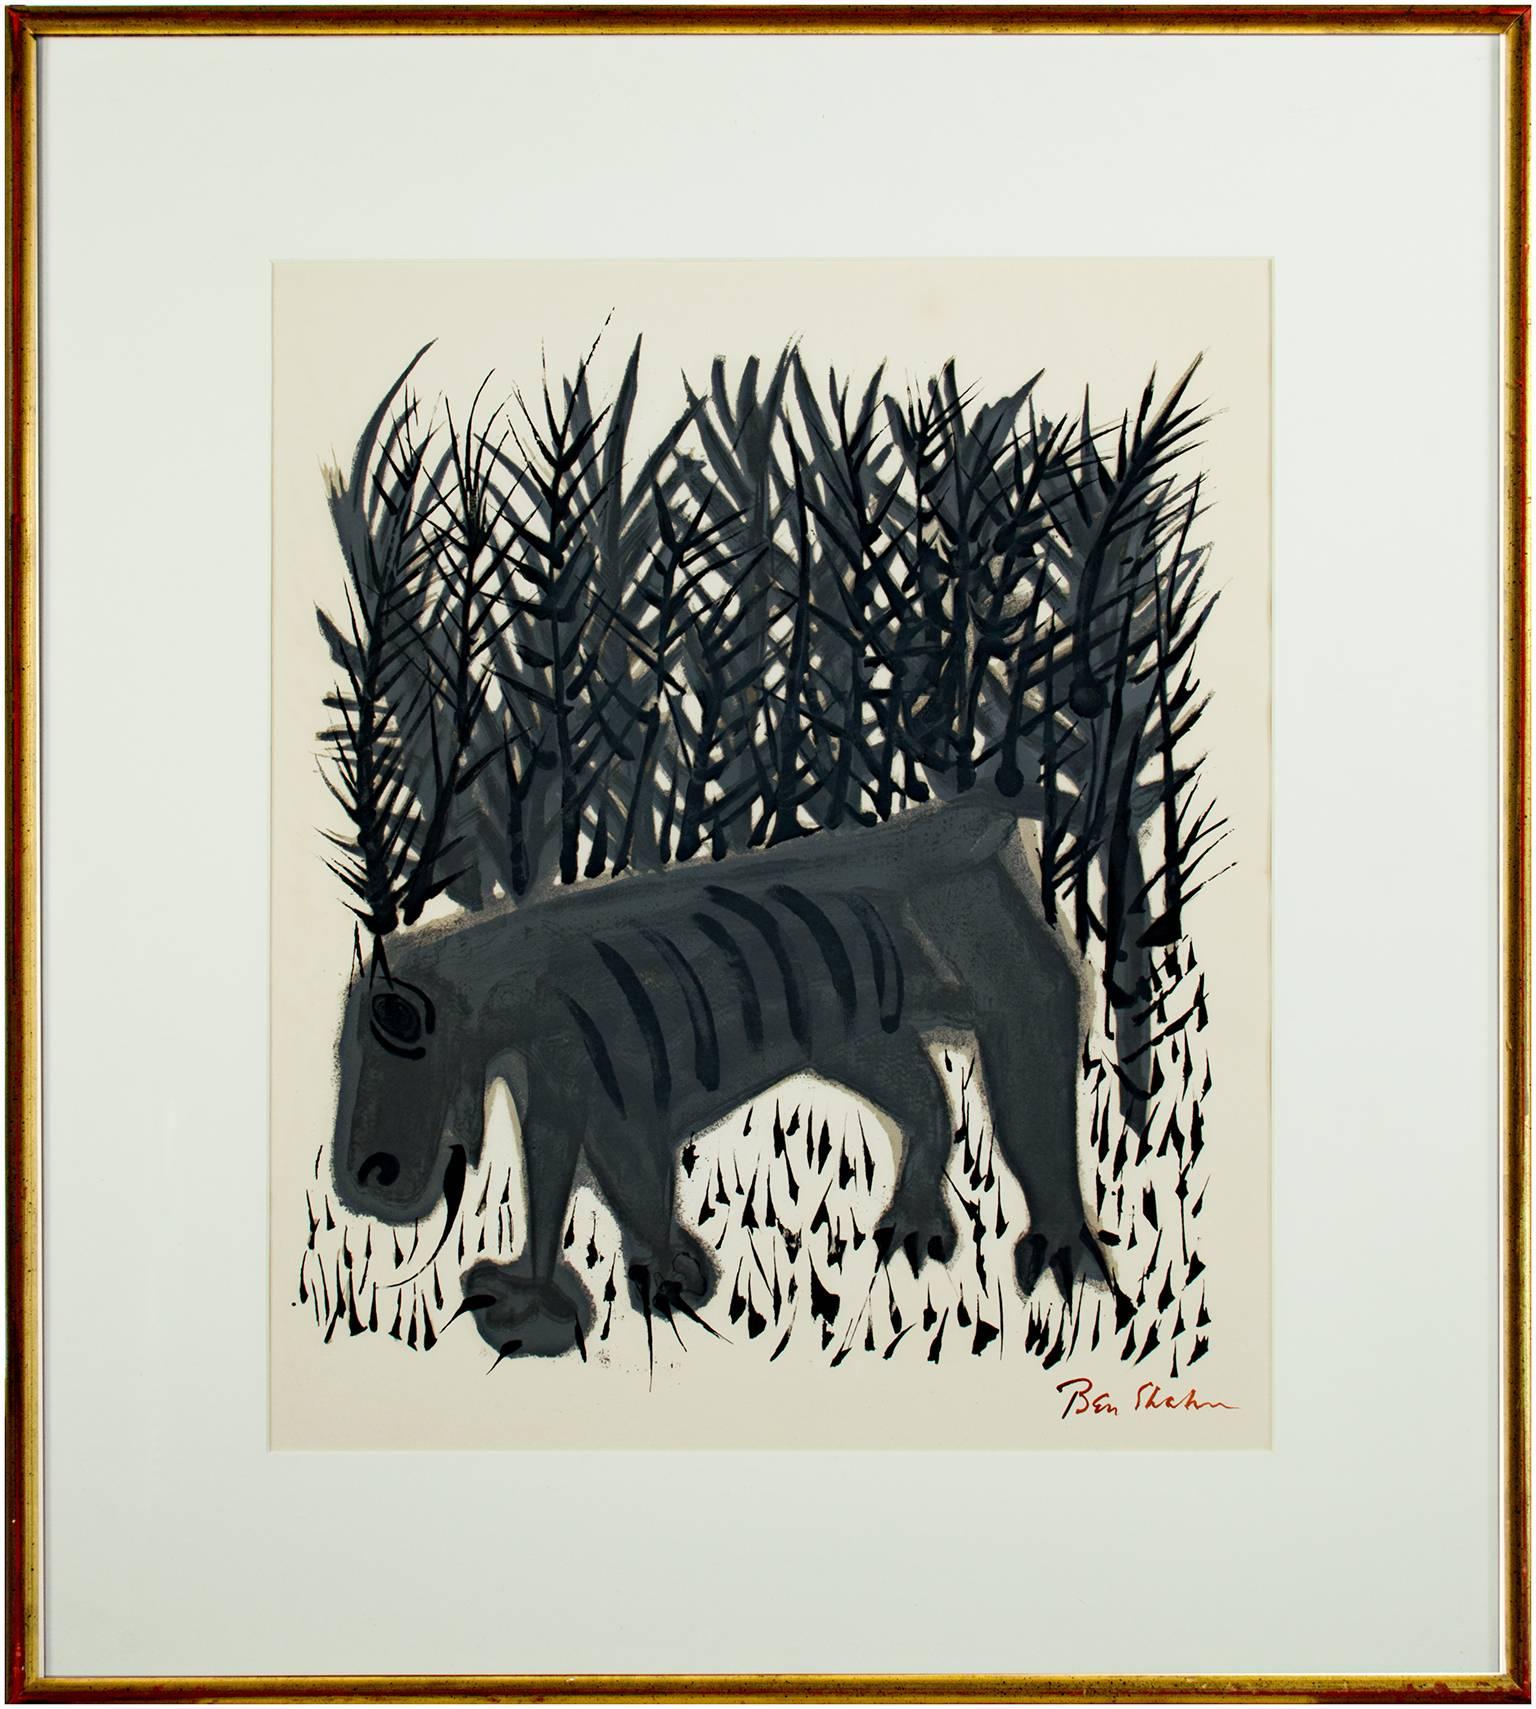 One Must Know the Animals - Black Animal Print by Ben Shahn